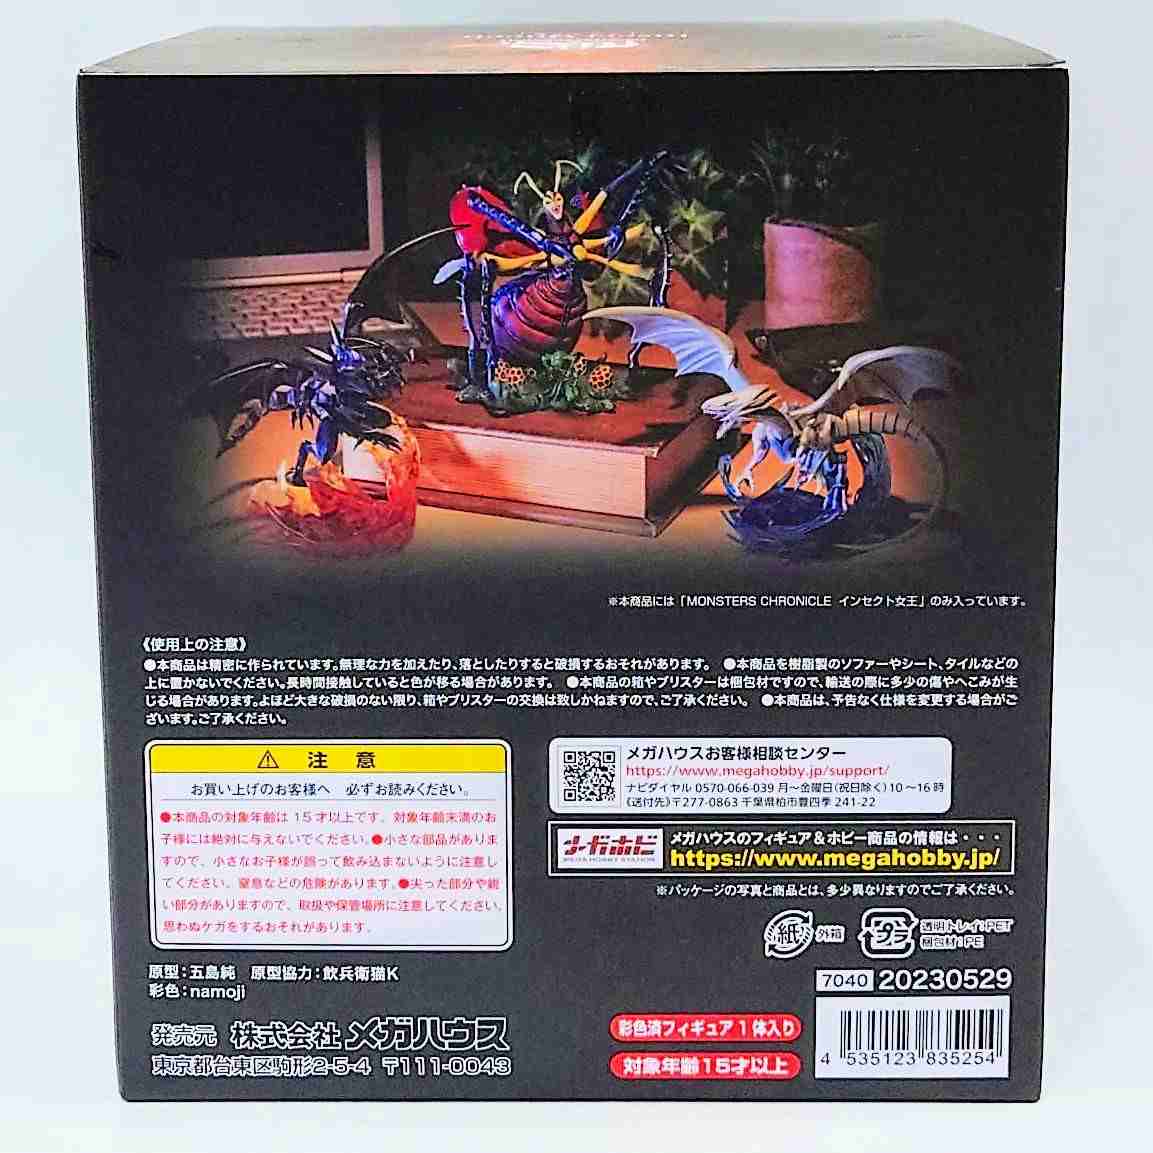 MONSTERS CHRONICLE Yu-Gi-Oh! Duel Monsters Insect Queen Completed Figure, animota